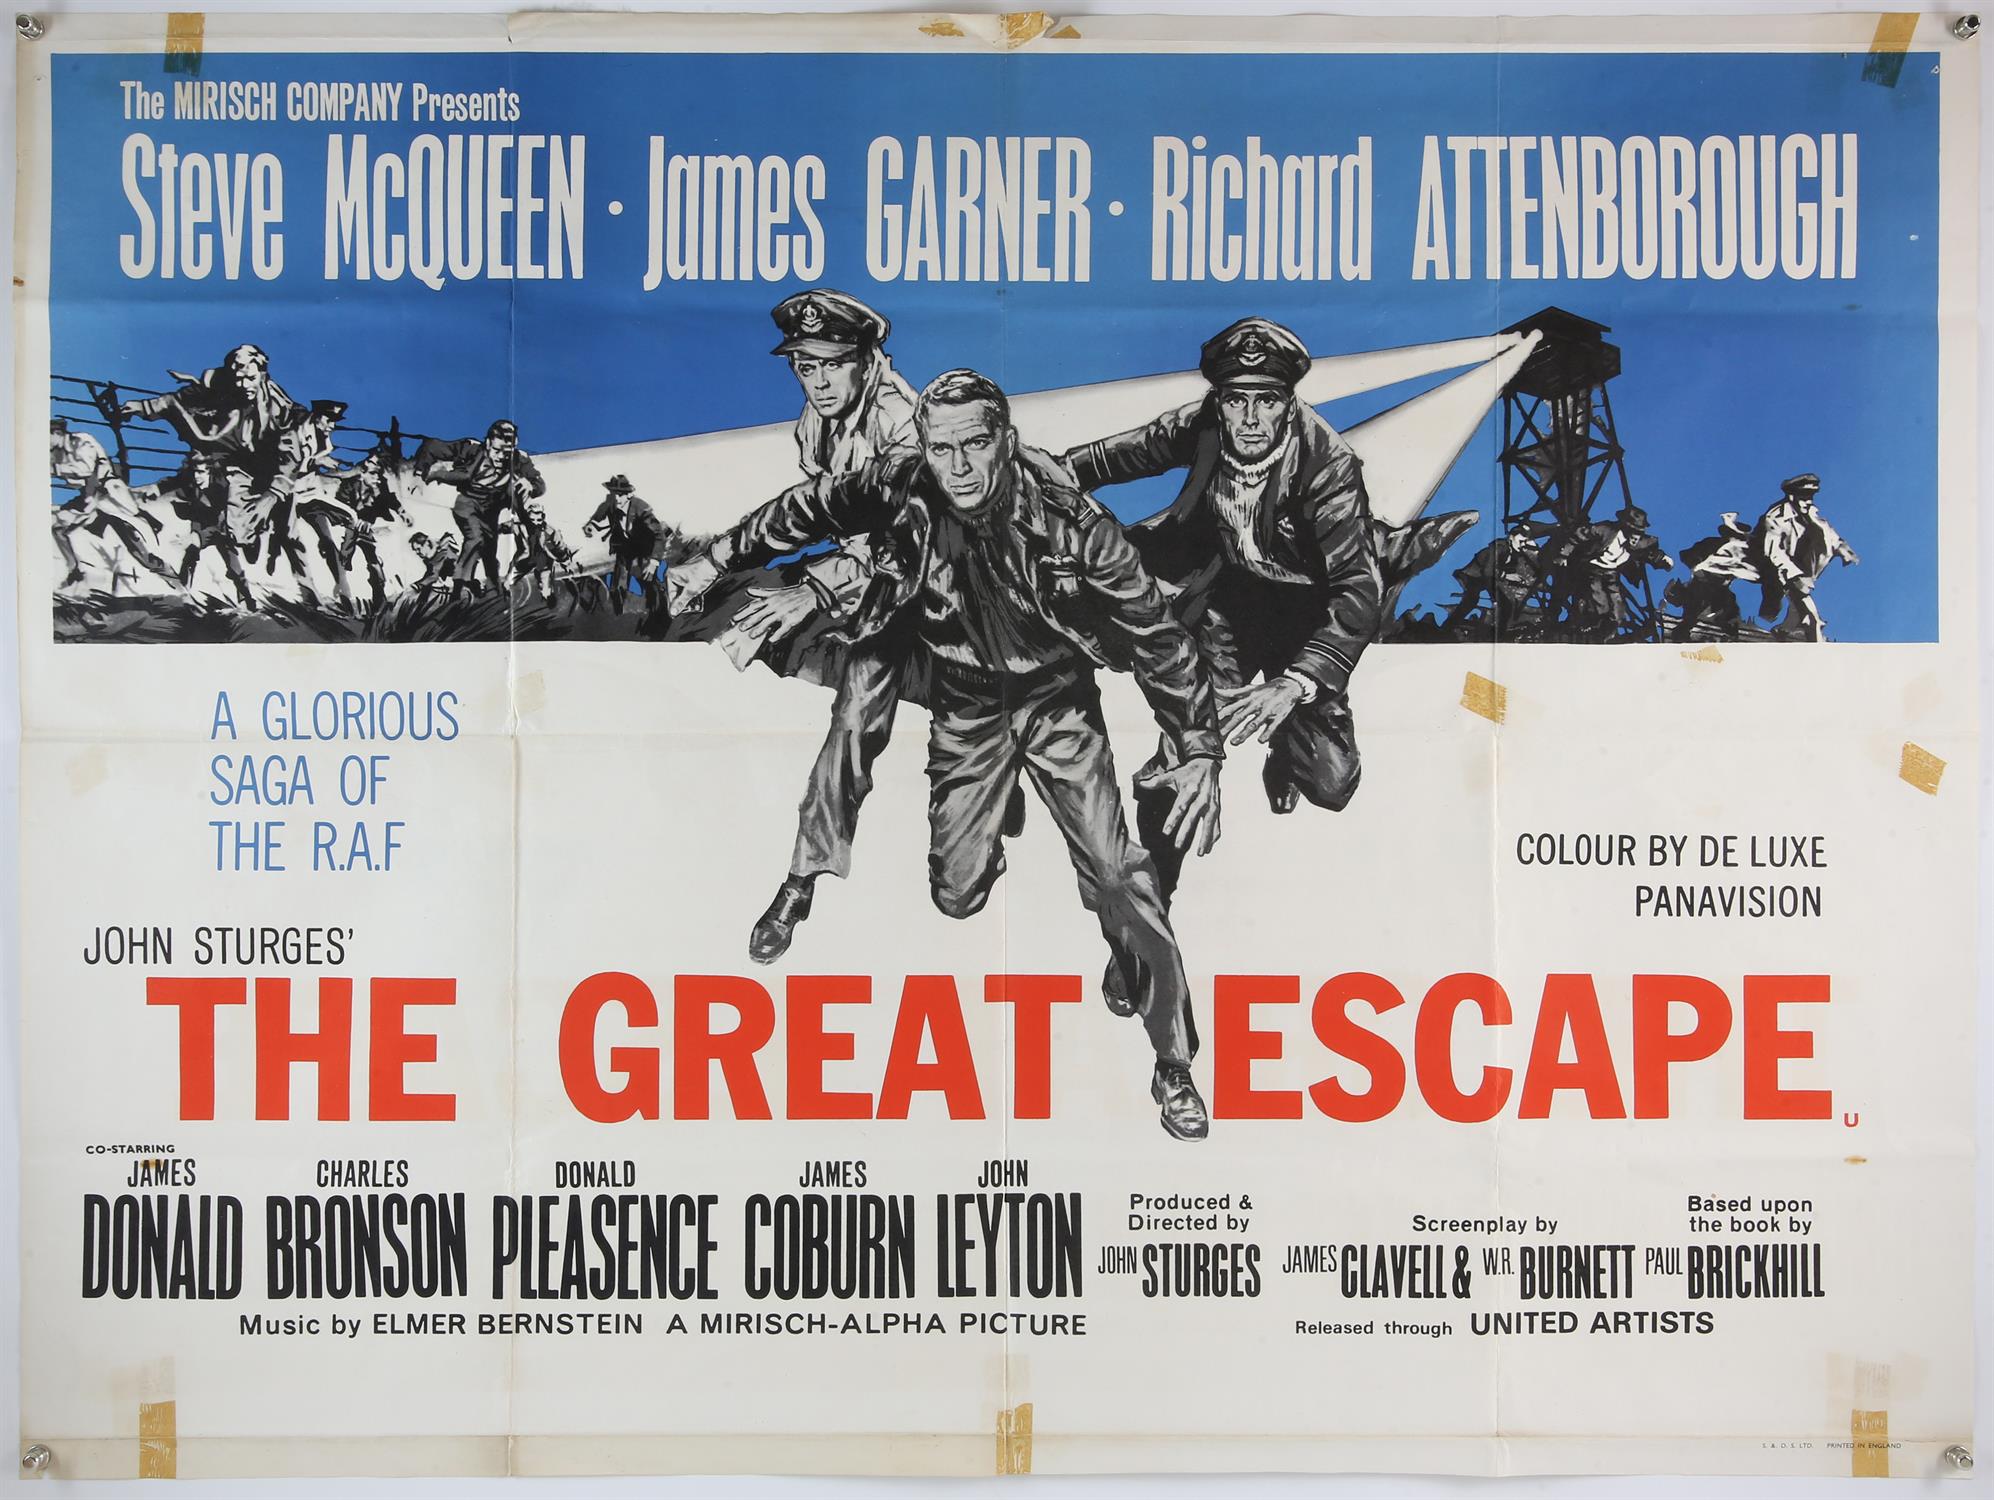 The Great Escape (R-1960 s) British Quad film poster, starring Steve McQueen, James Garner and